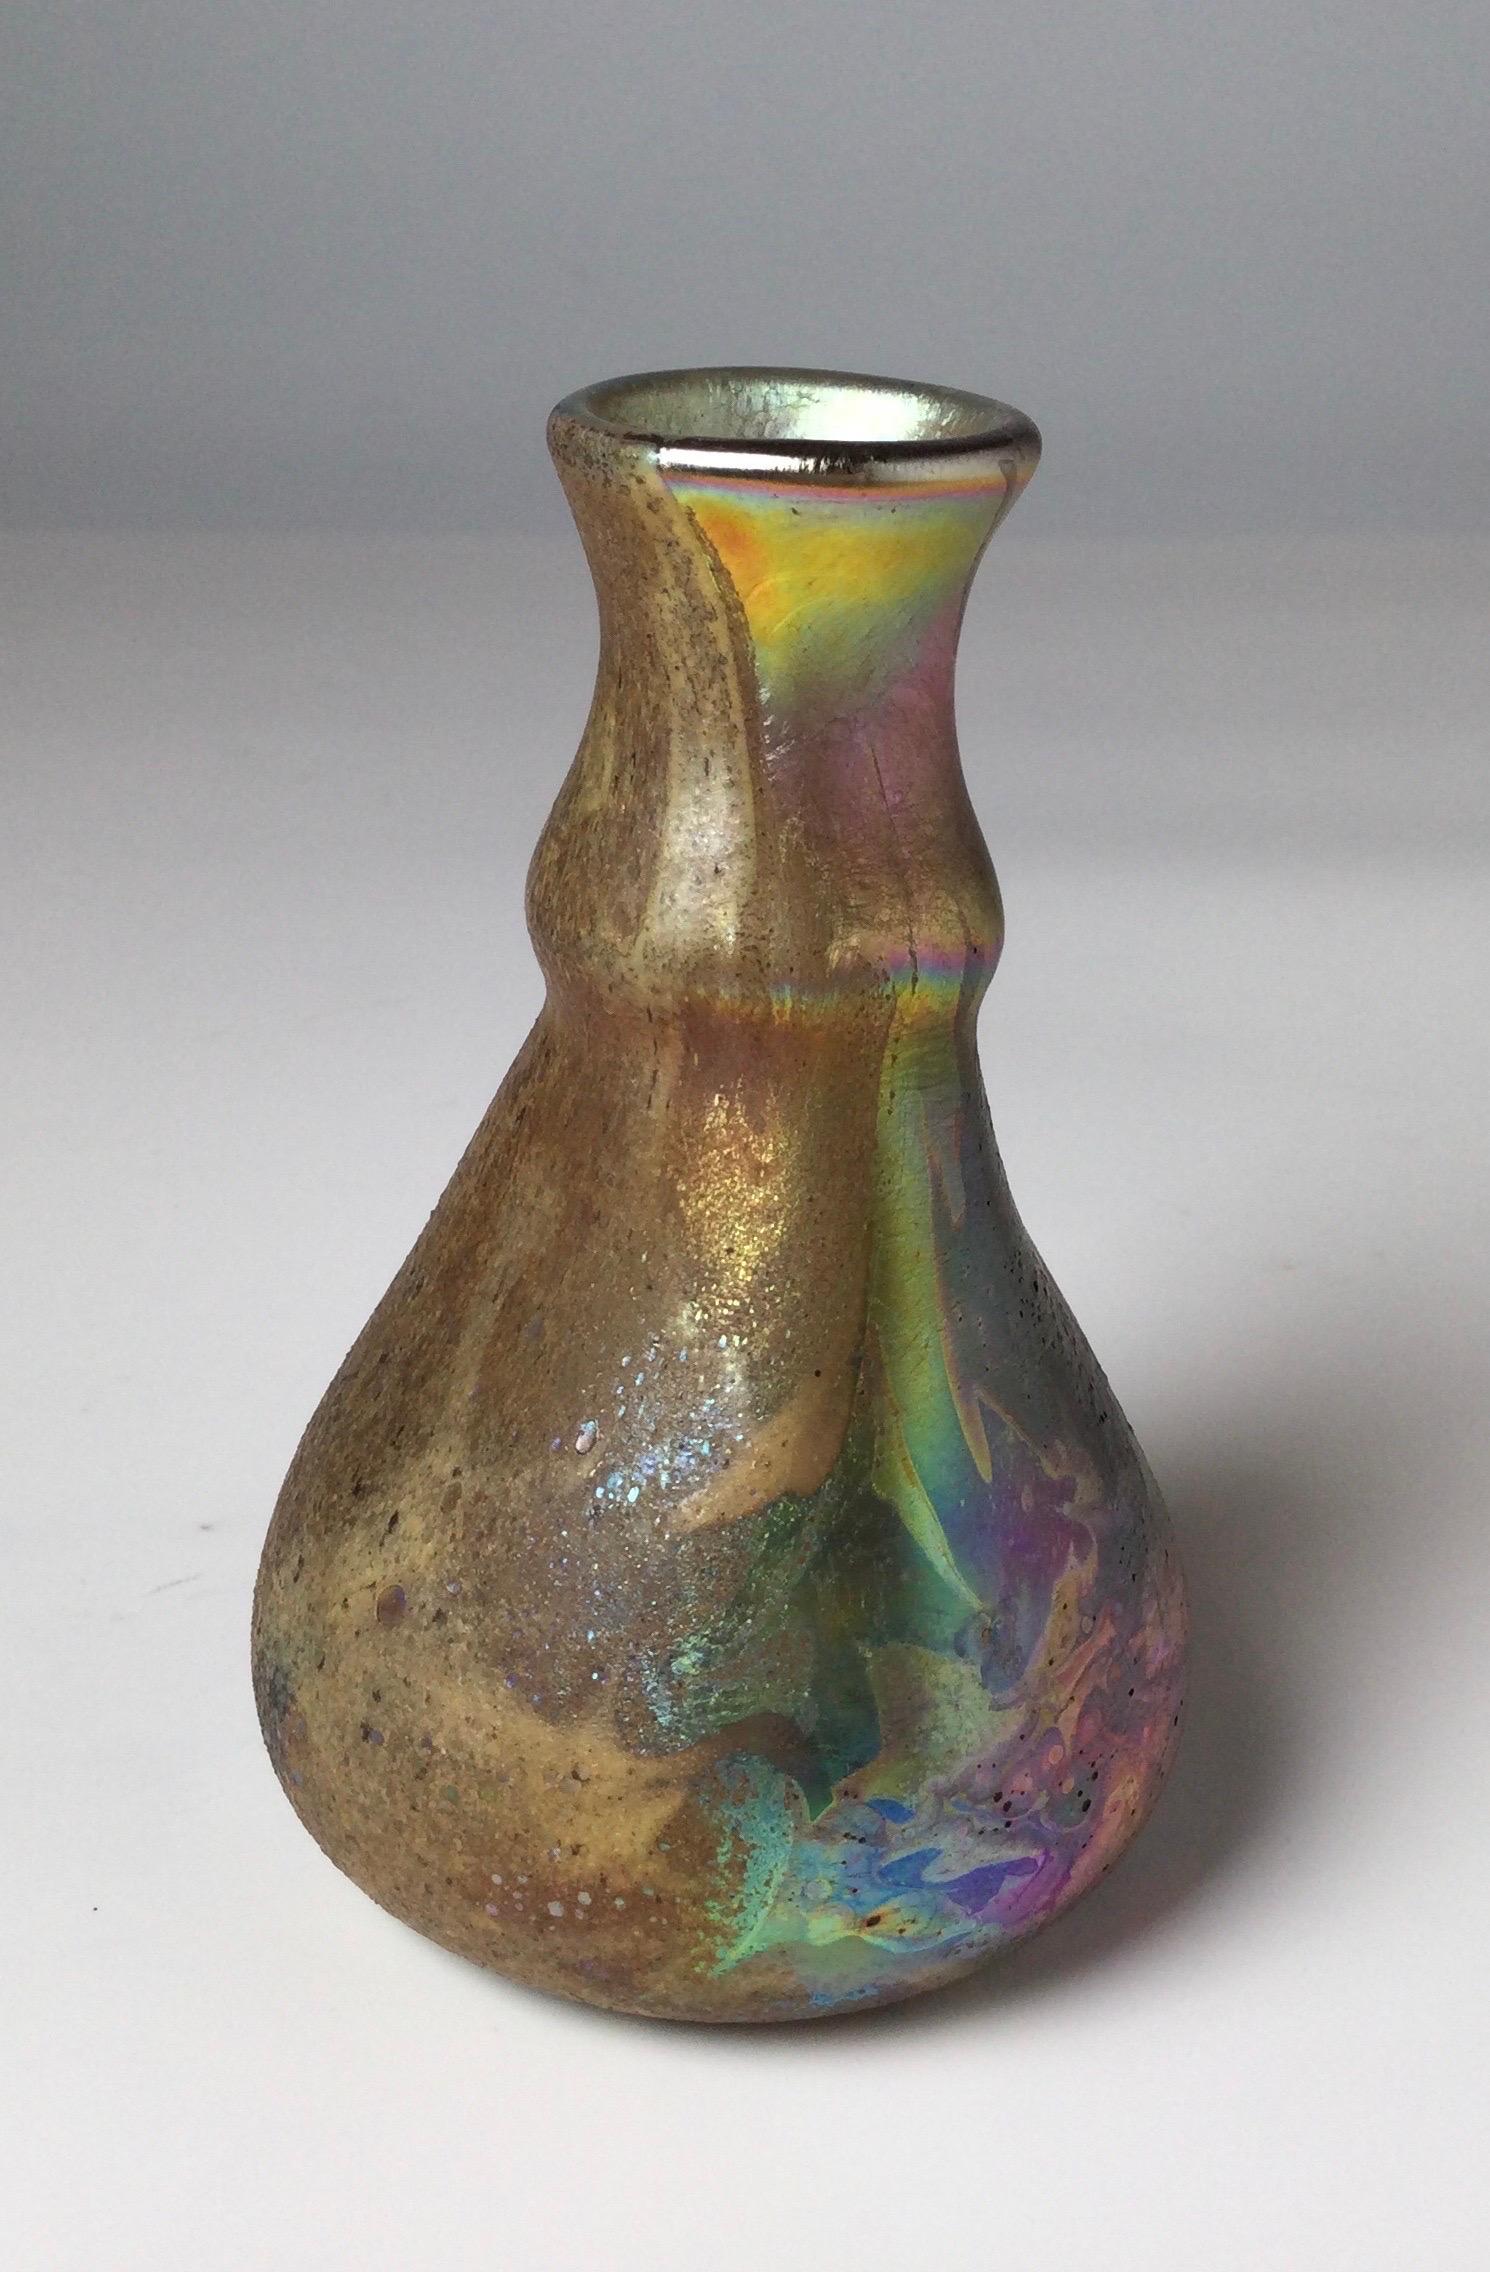 A Louis comfort Tiffany Cypriot lava glass vase of irregular tapering form with swelled neck and flared lip. The glass in shades of blue, pink, gold iridescence with spotted areas. Unsigned, Provenance Mr. and Mrs. George Schrim.